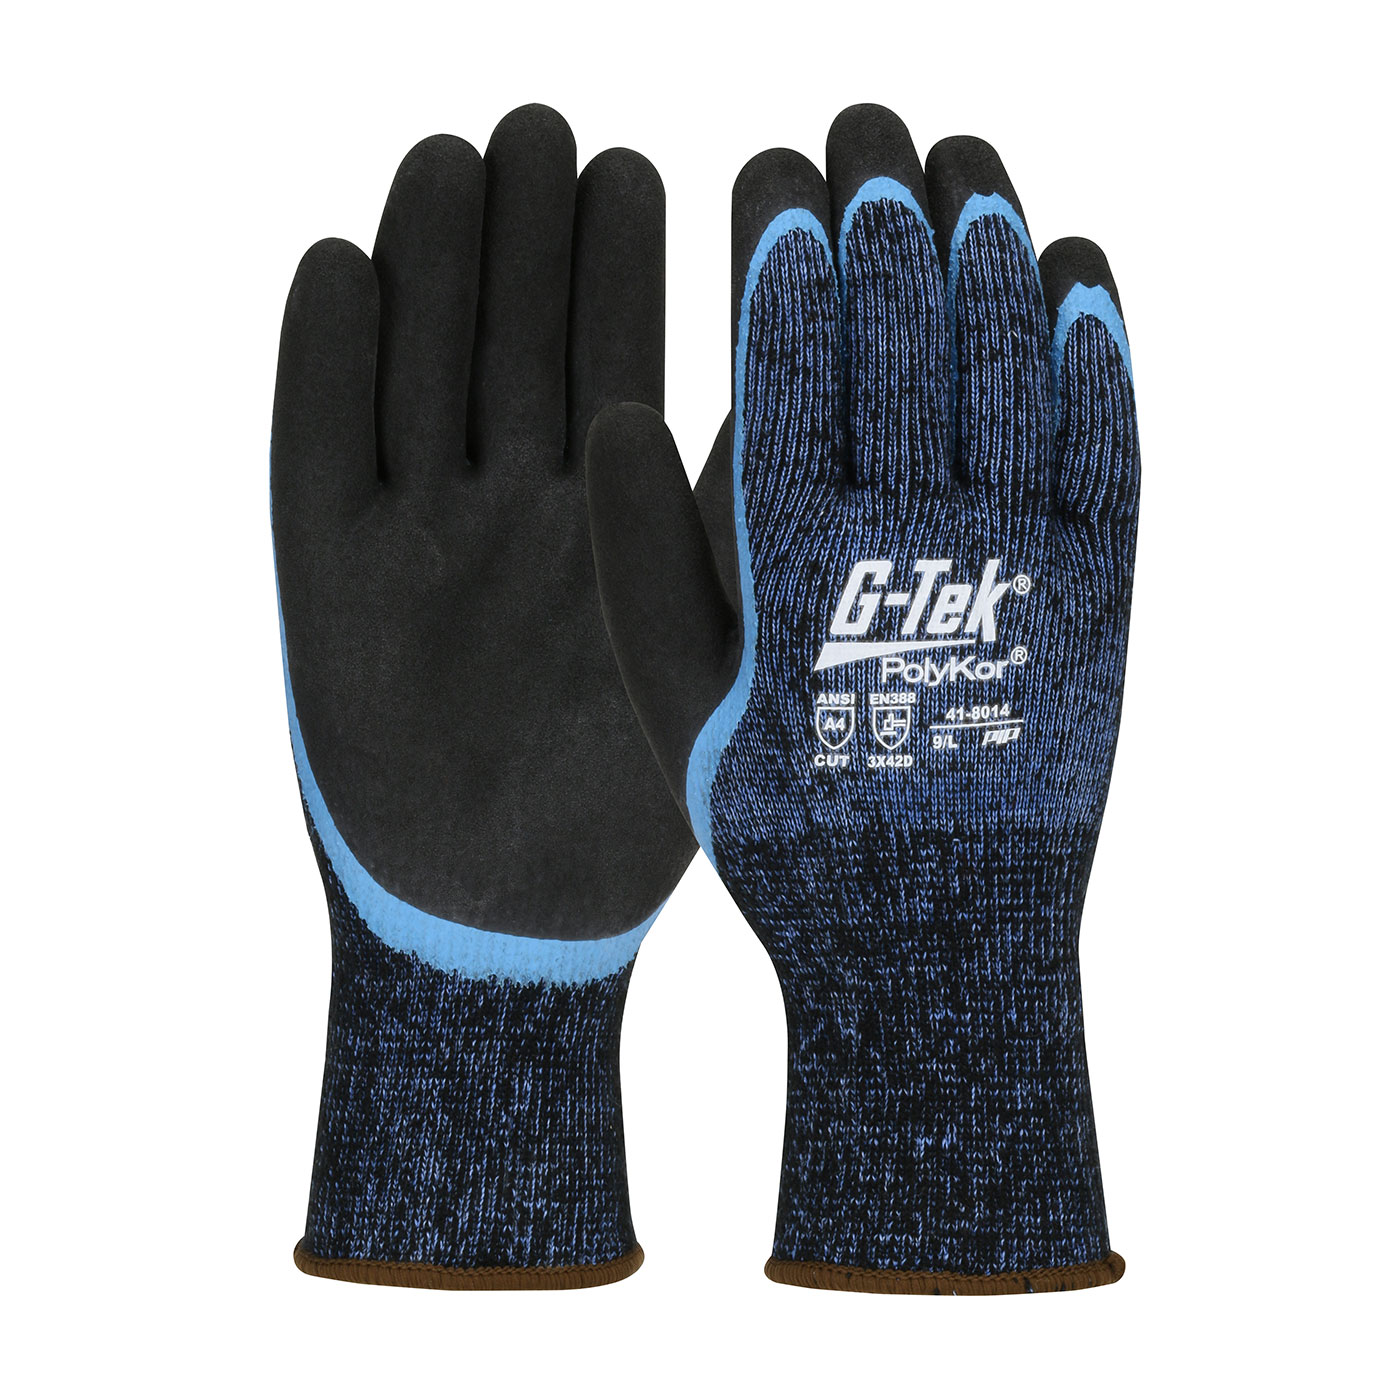 #41-8014 PIP® G-Tek® Seamless Knit PolyKor® Glove with Acrylic Liner and Double Dipped Latex  Coated MicroSurface Palm Grip